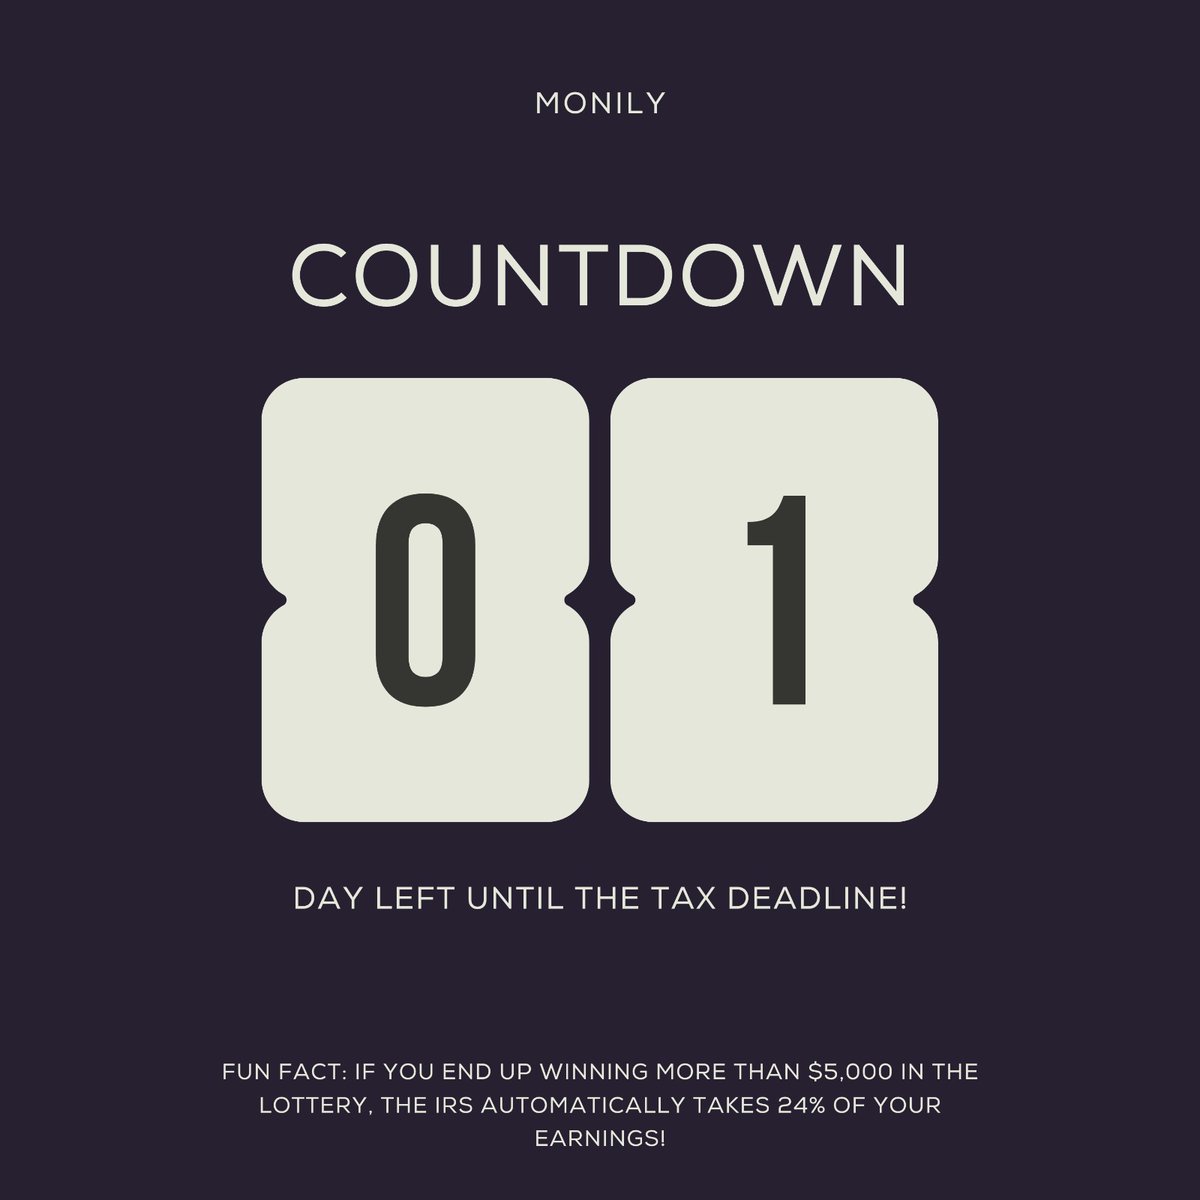 The day is almost here. Don't worry! There is still time for that final stretch. In case you want to file for an extension, feel free to reach out! While you wait, here's a fun fact you should know!

#TaxDay #taxdeadline #monilyaccounting #cfo #taxservices